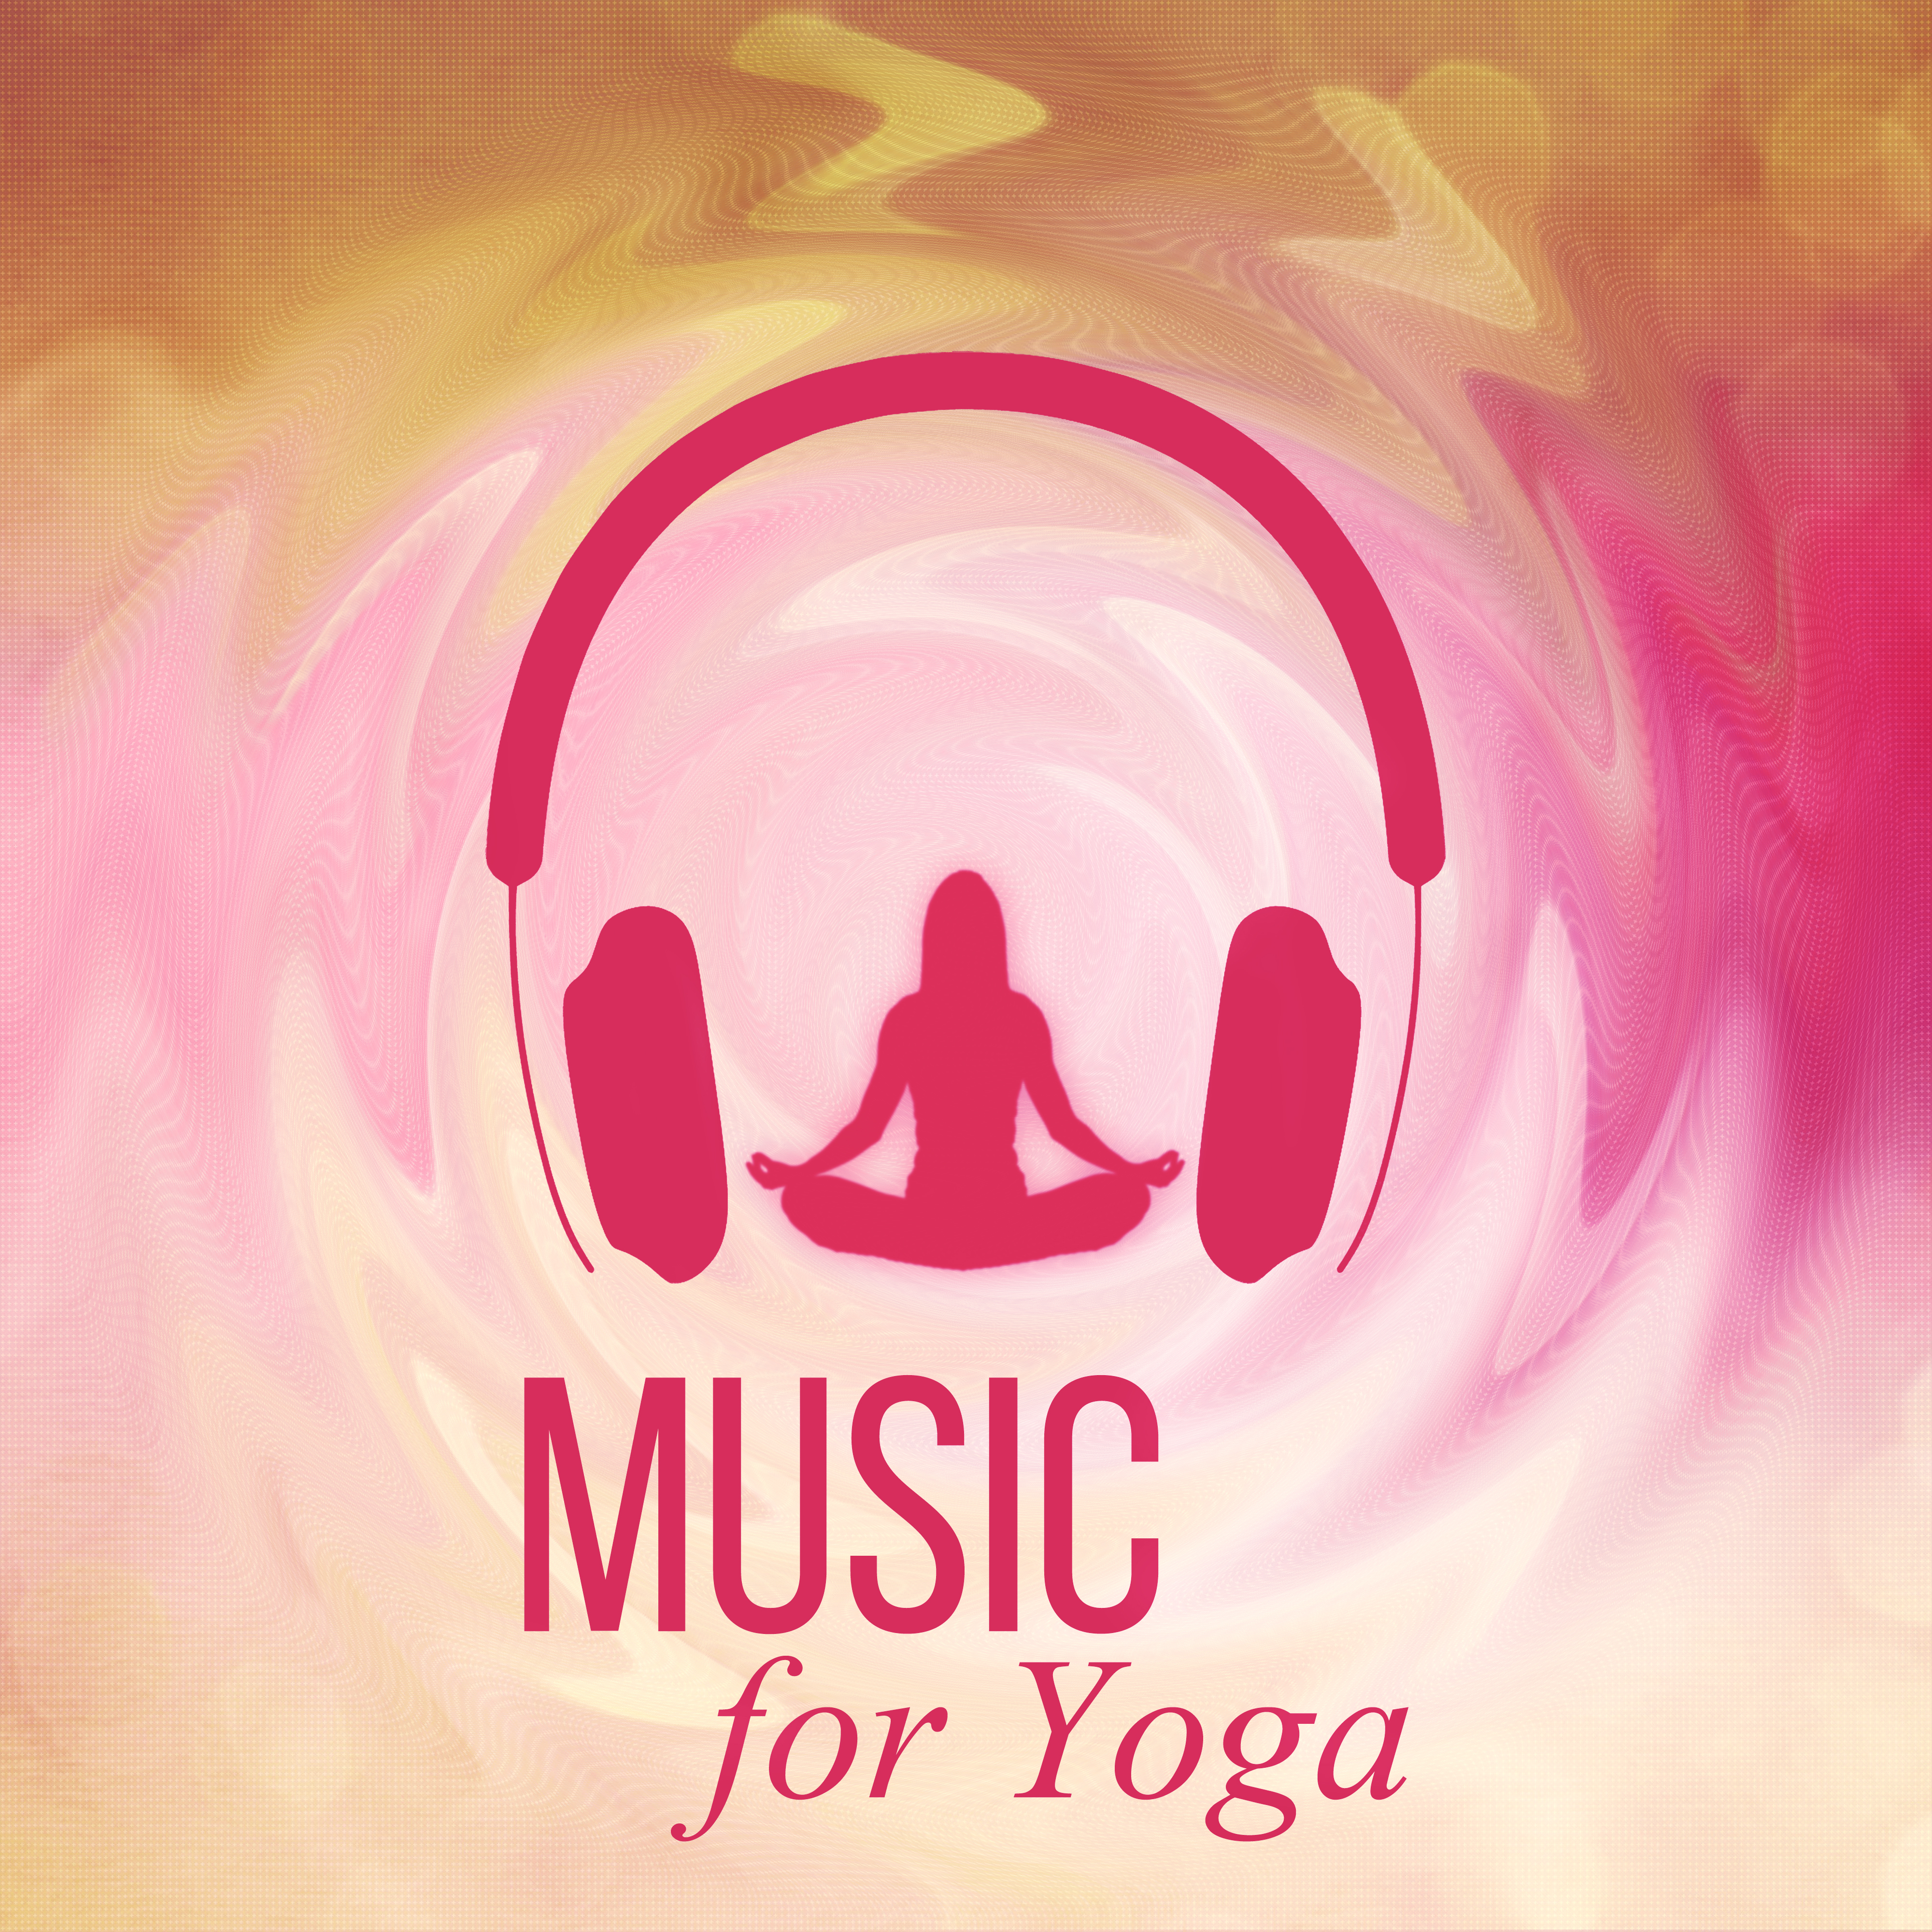 Music for Yoga - Sound Therapy, Relaxation Meditation, Sounds of Nature, Soothing Music, Instrumental Music, Massage Therapy, Relaxing Piano Sounds